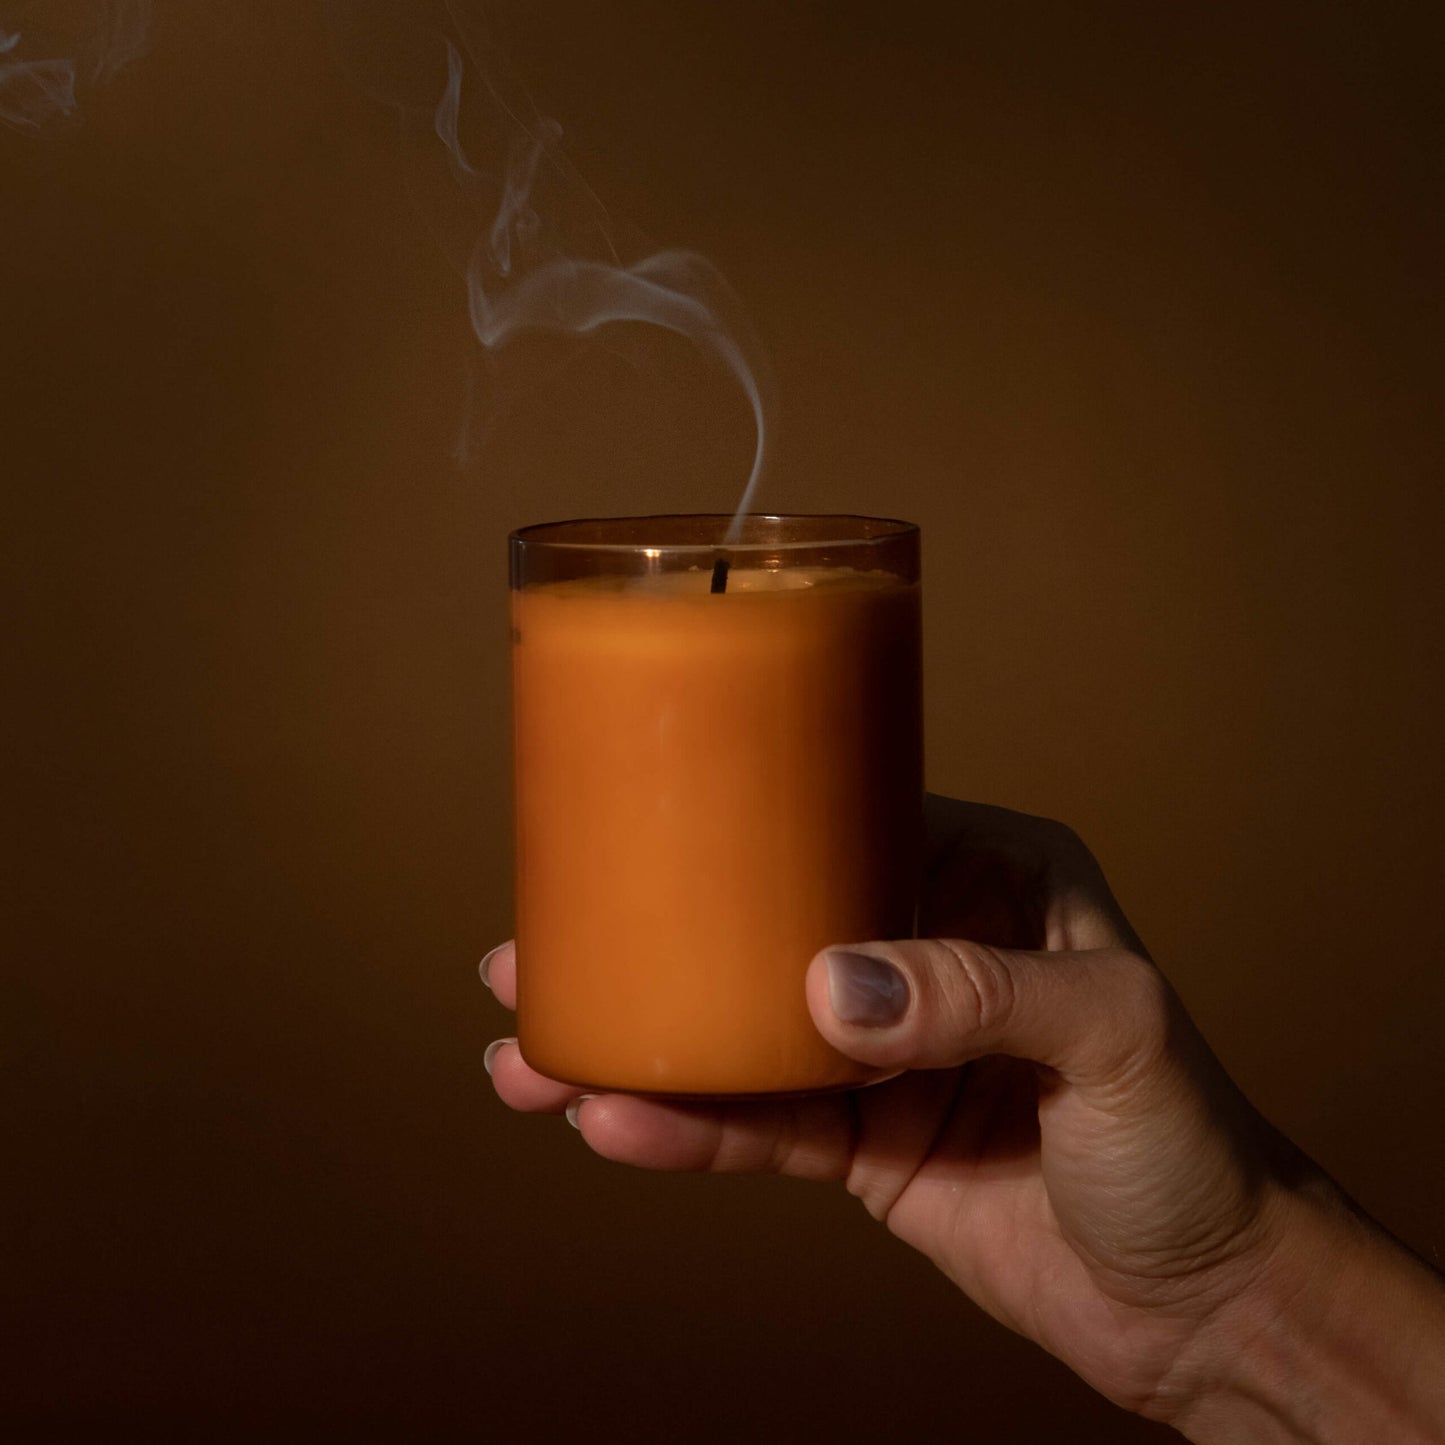 Field Kit The Fire Scented Candle - Osmology Scented Candles & Home Fragrance